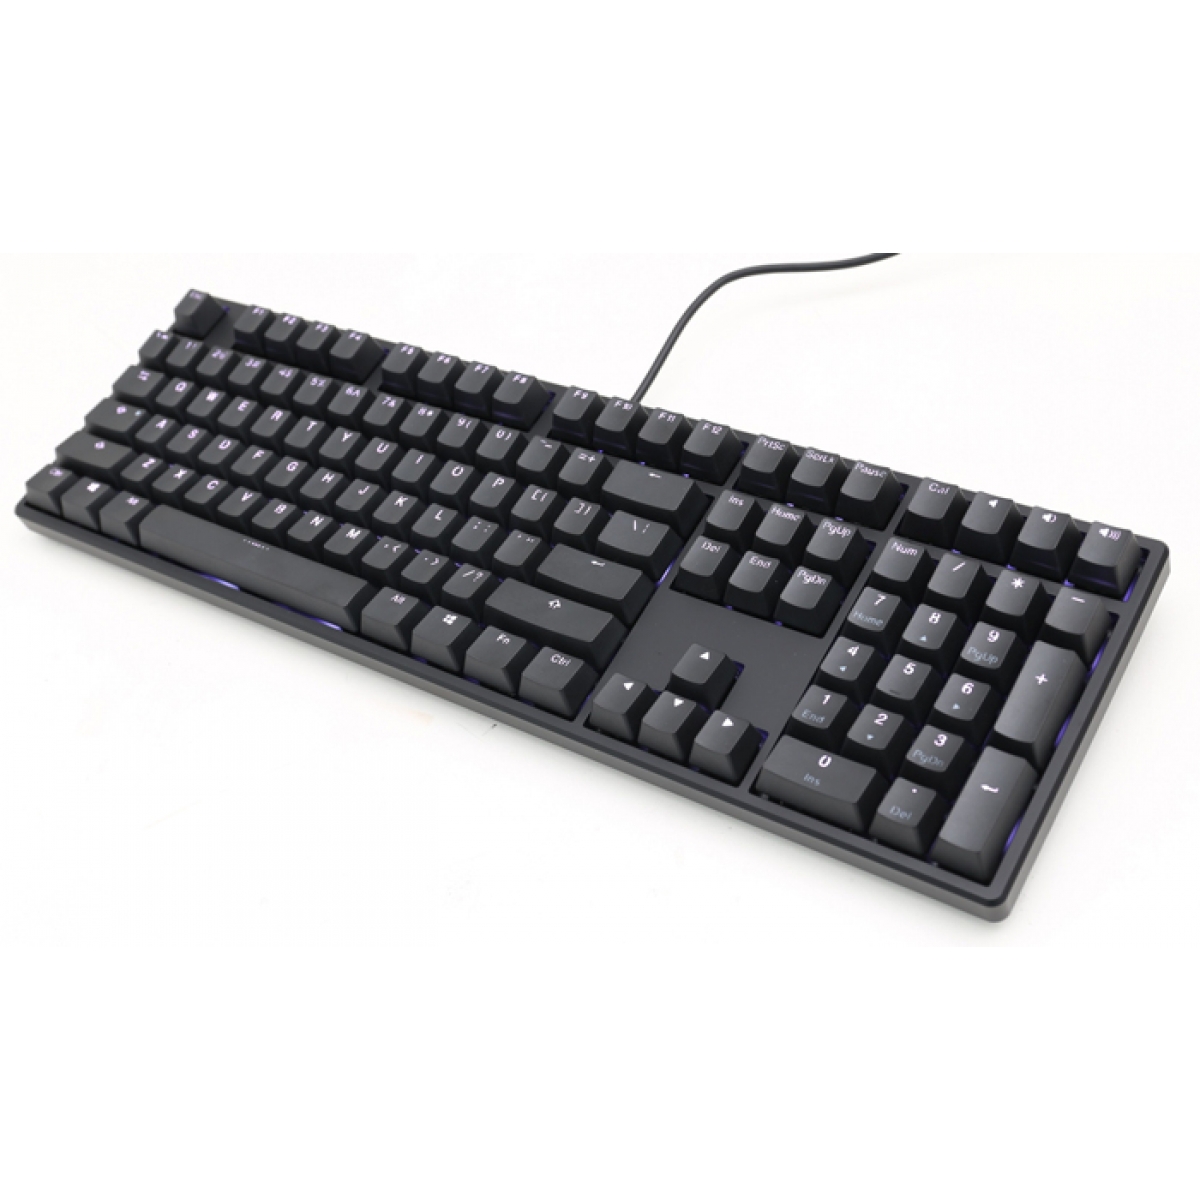 Teclado Gamer Mecanico Ducky Channel One, LED Branco, Switch Red